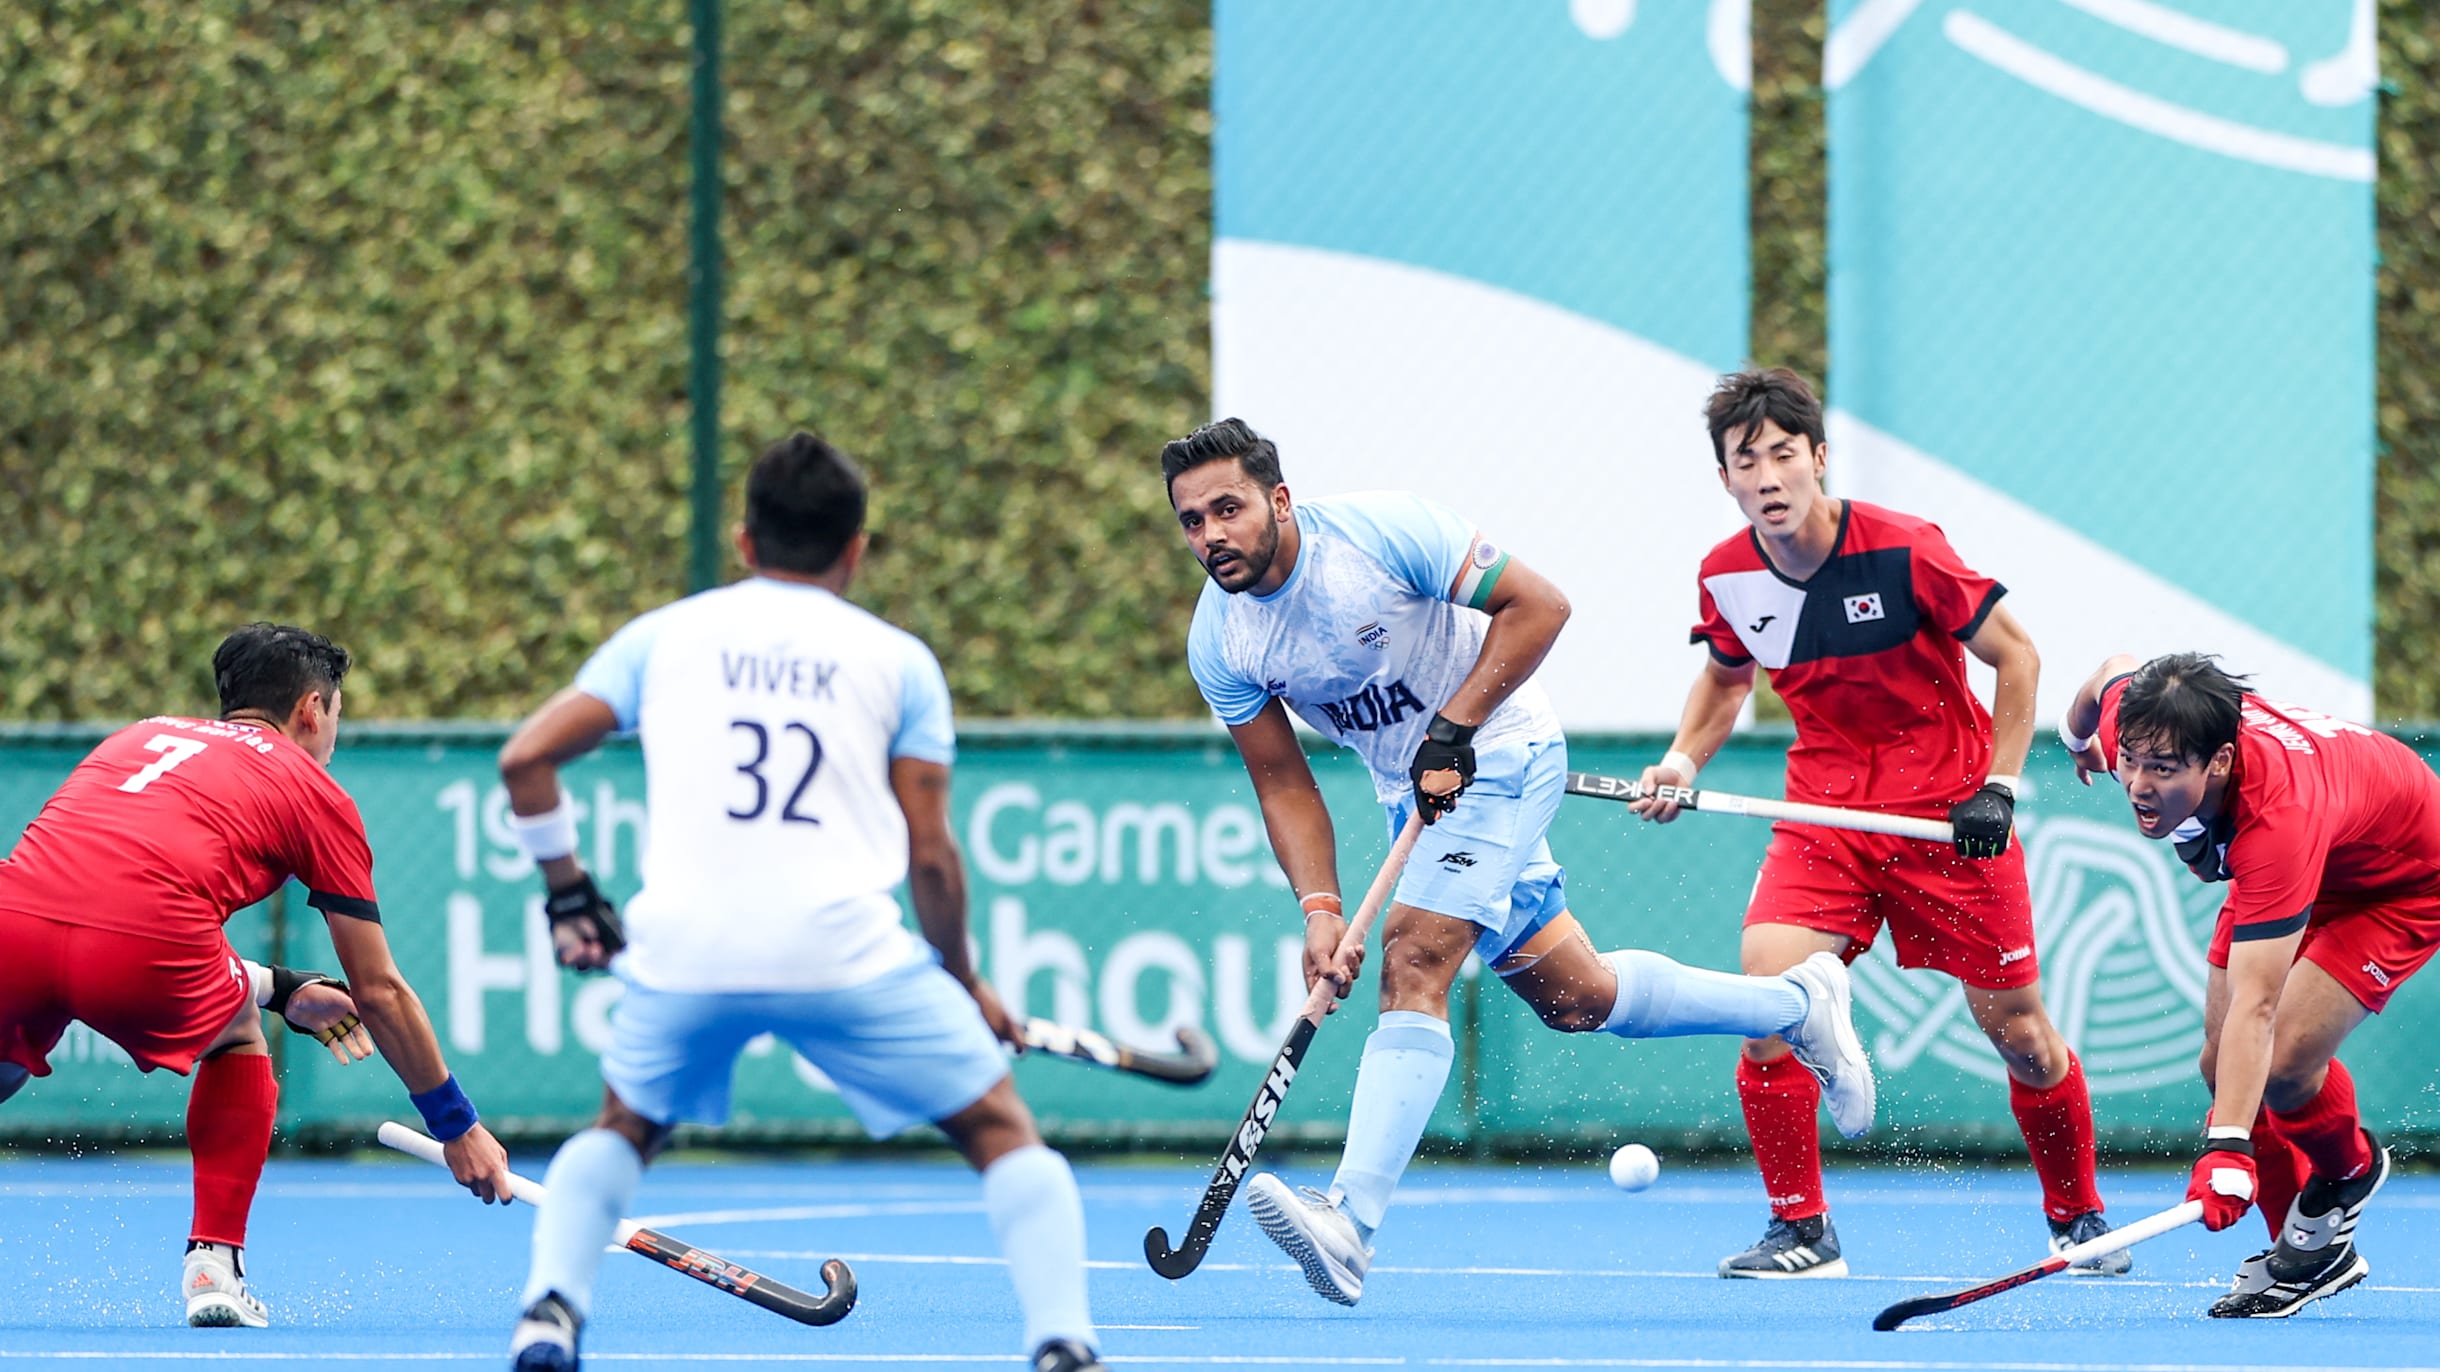 How to Watch Men's FIH Hockey World Cup outside India [2023 GUIDE]